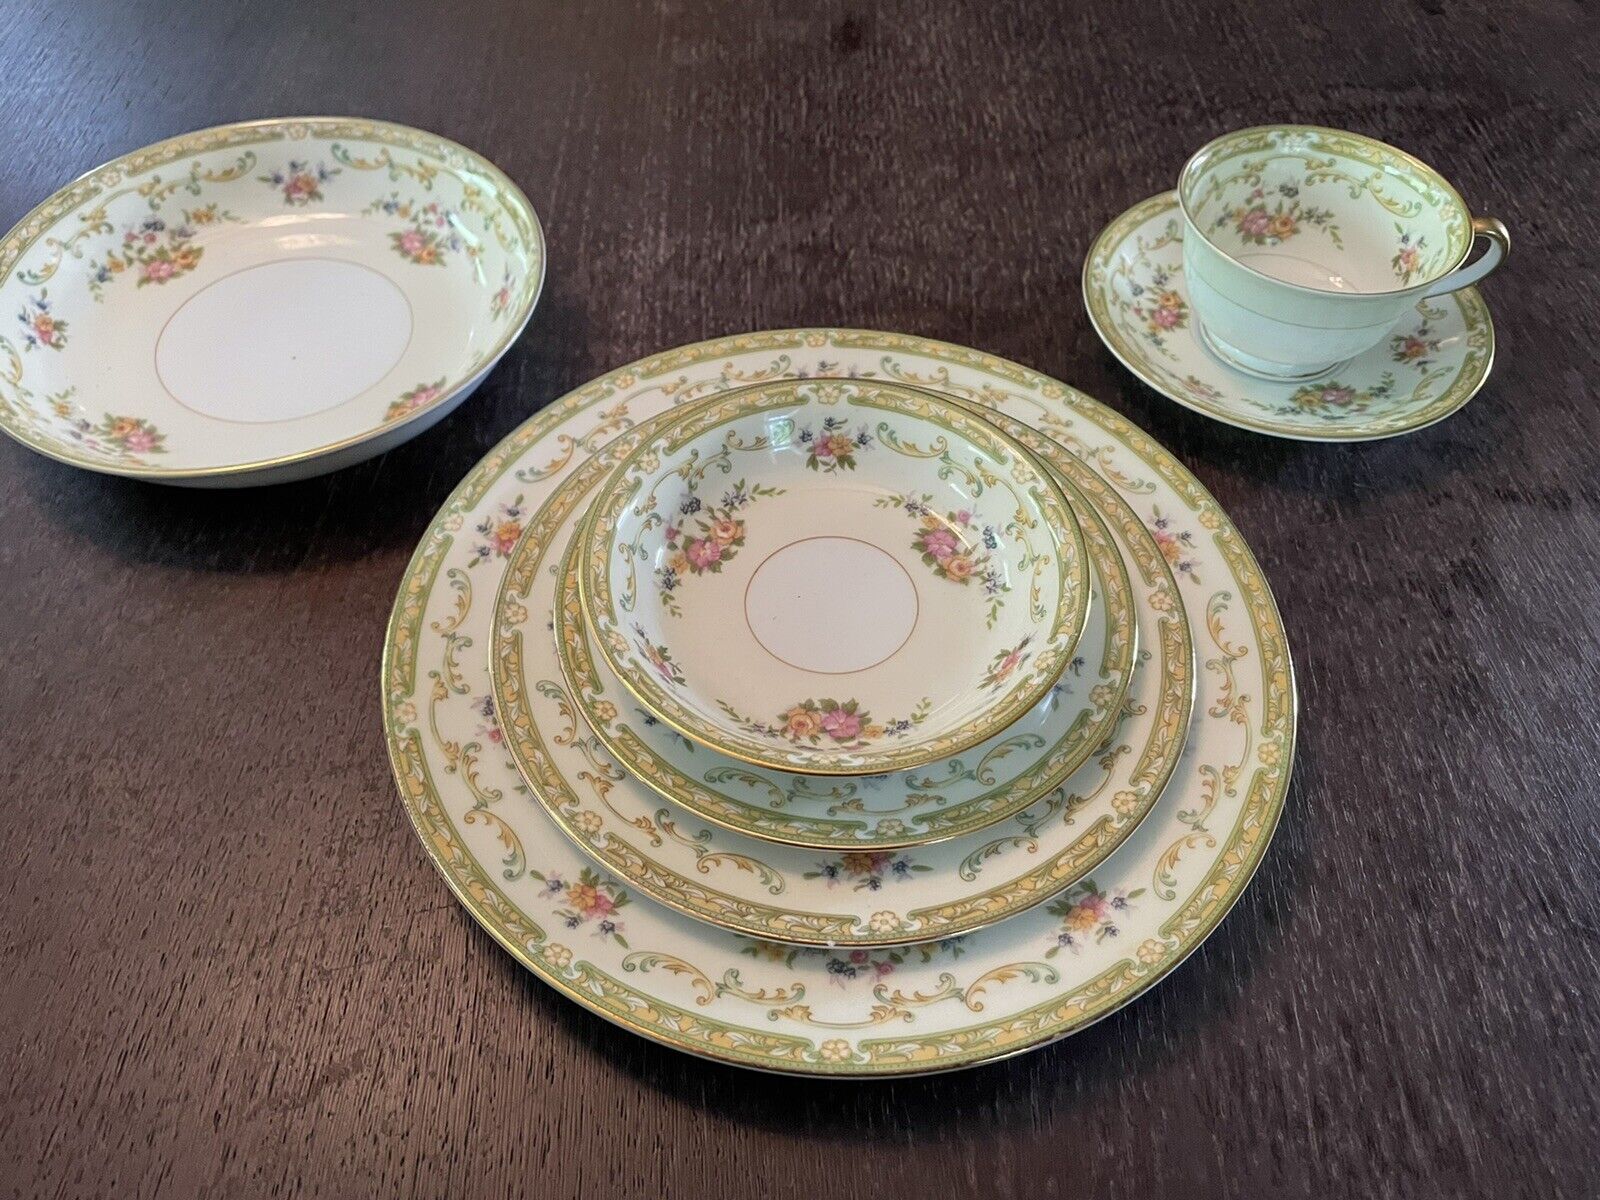 VINTAGE Noritake China Service Set for One Setting = 7 Pieces